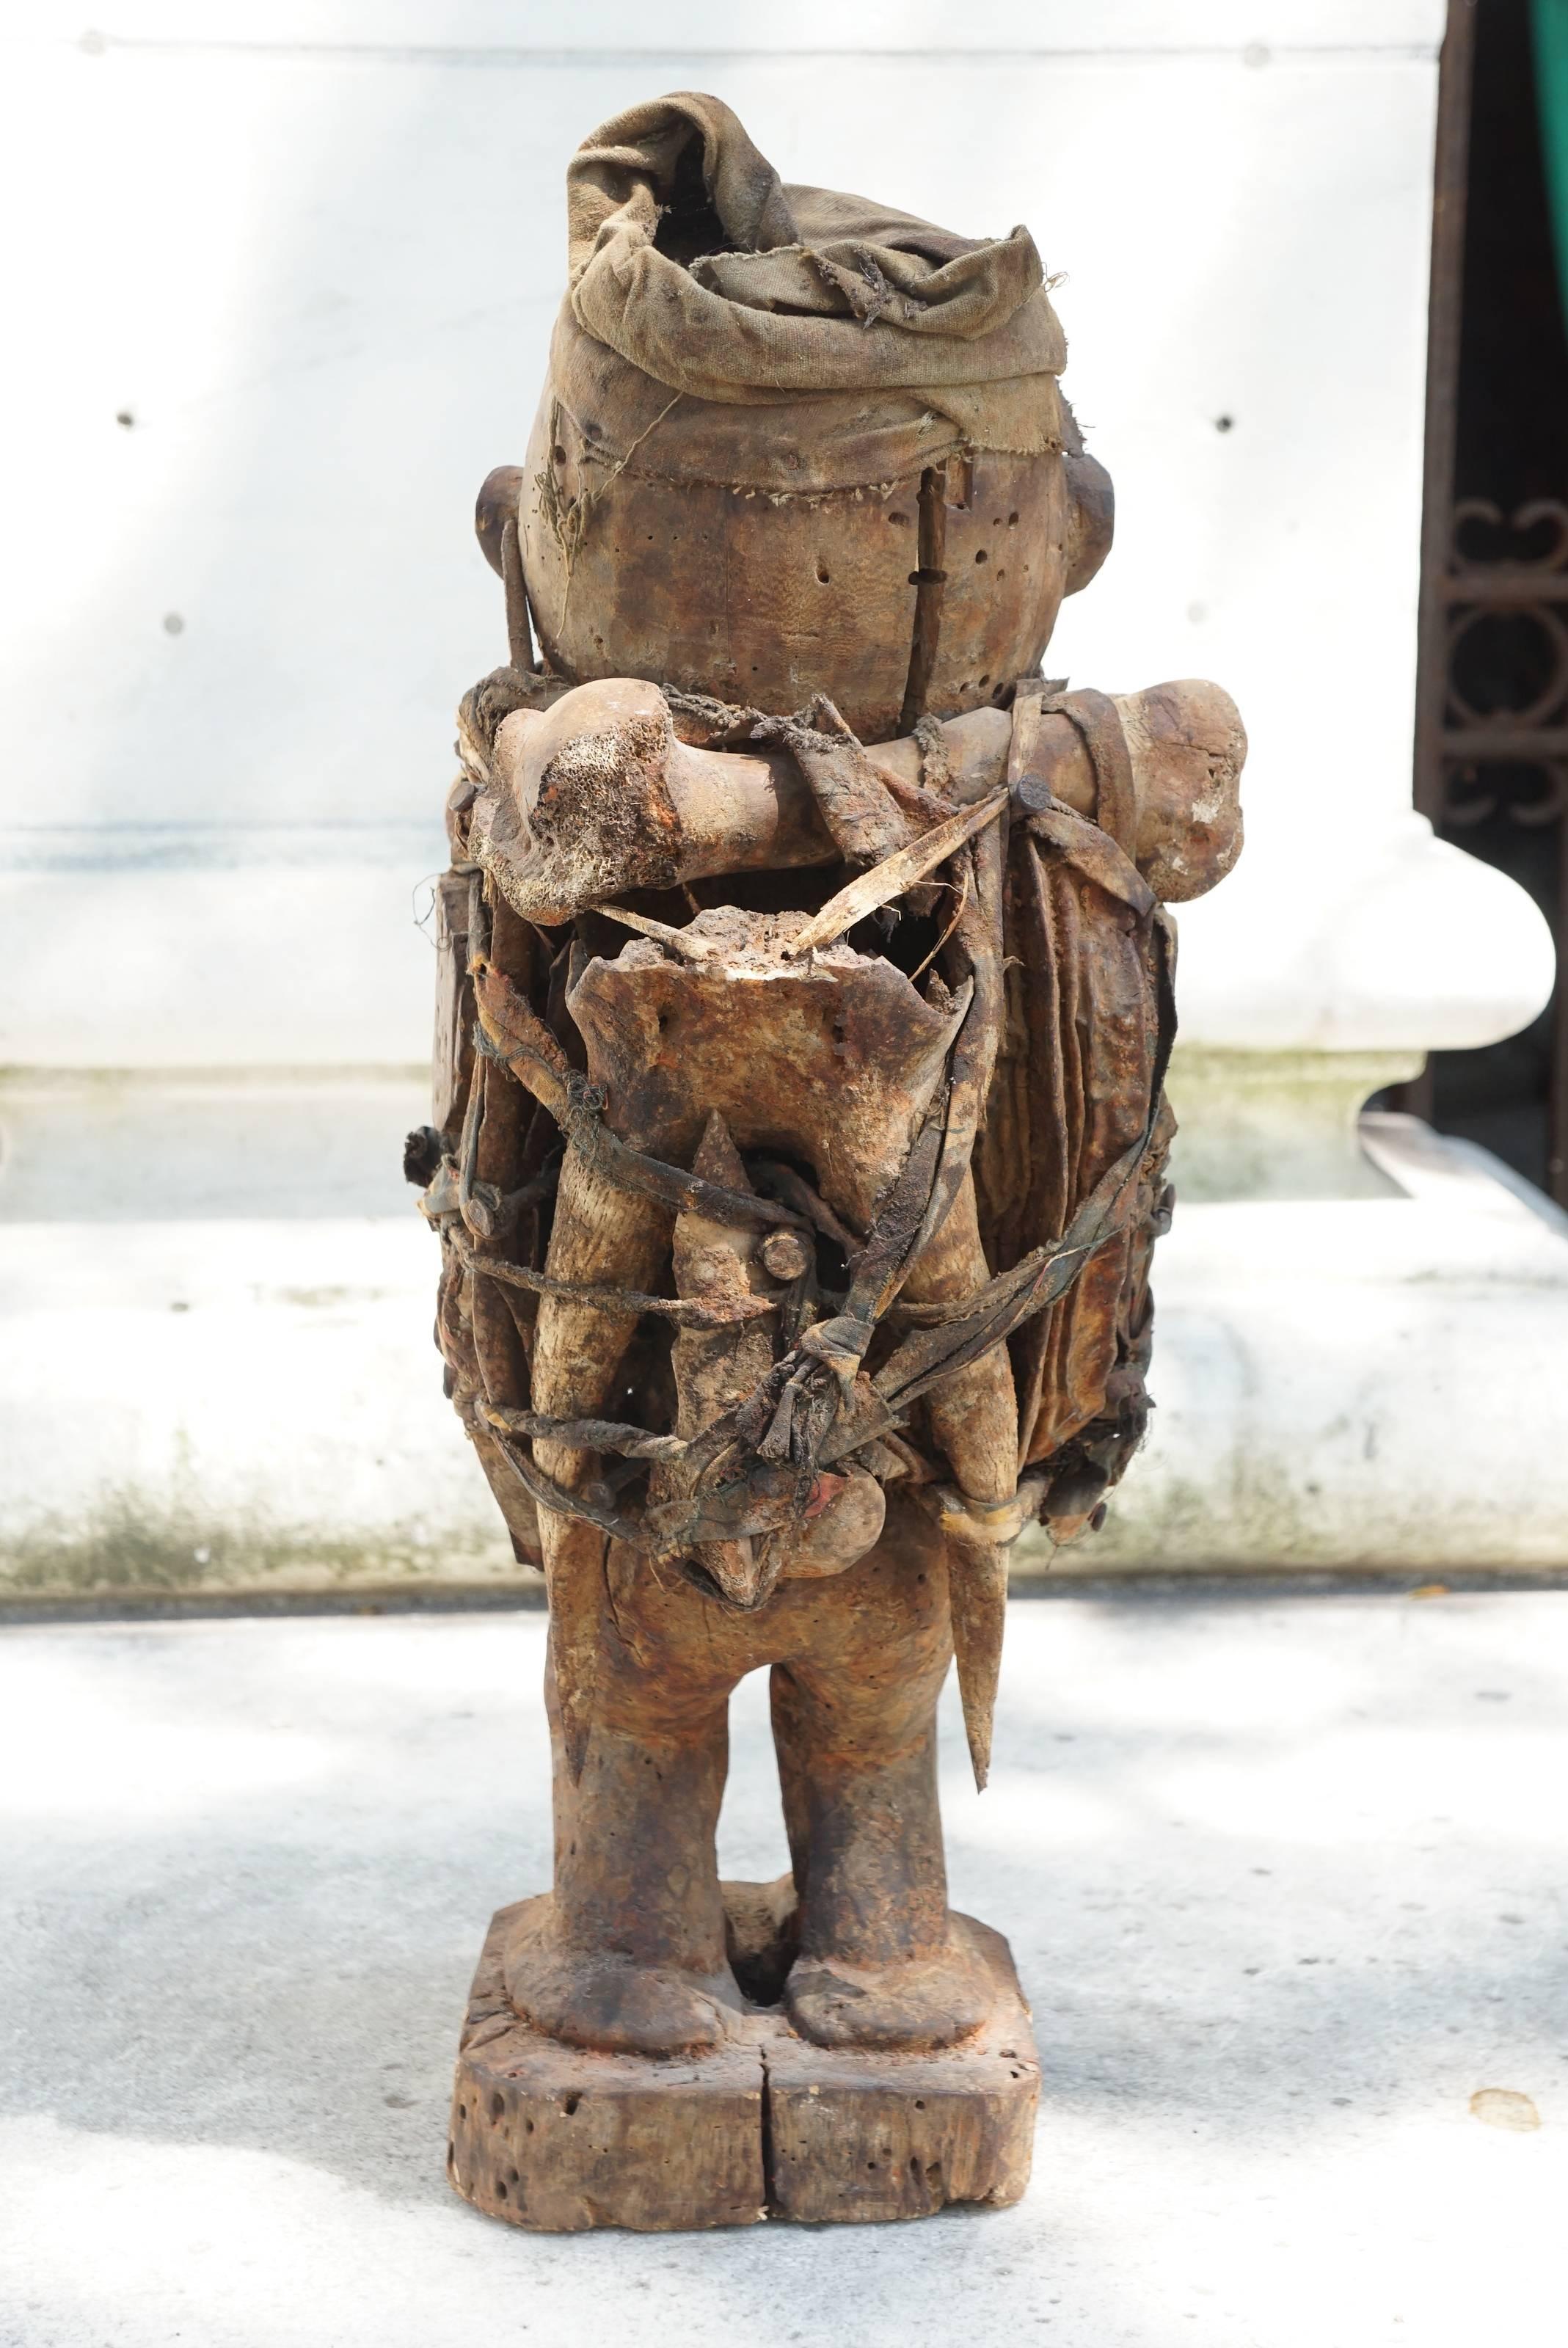 Primitive Late 19th Century Bakongo Peoples Carved Wood Fetish or Power Figure